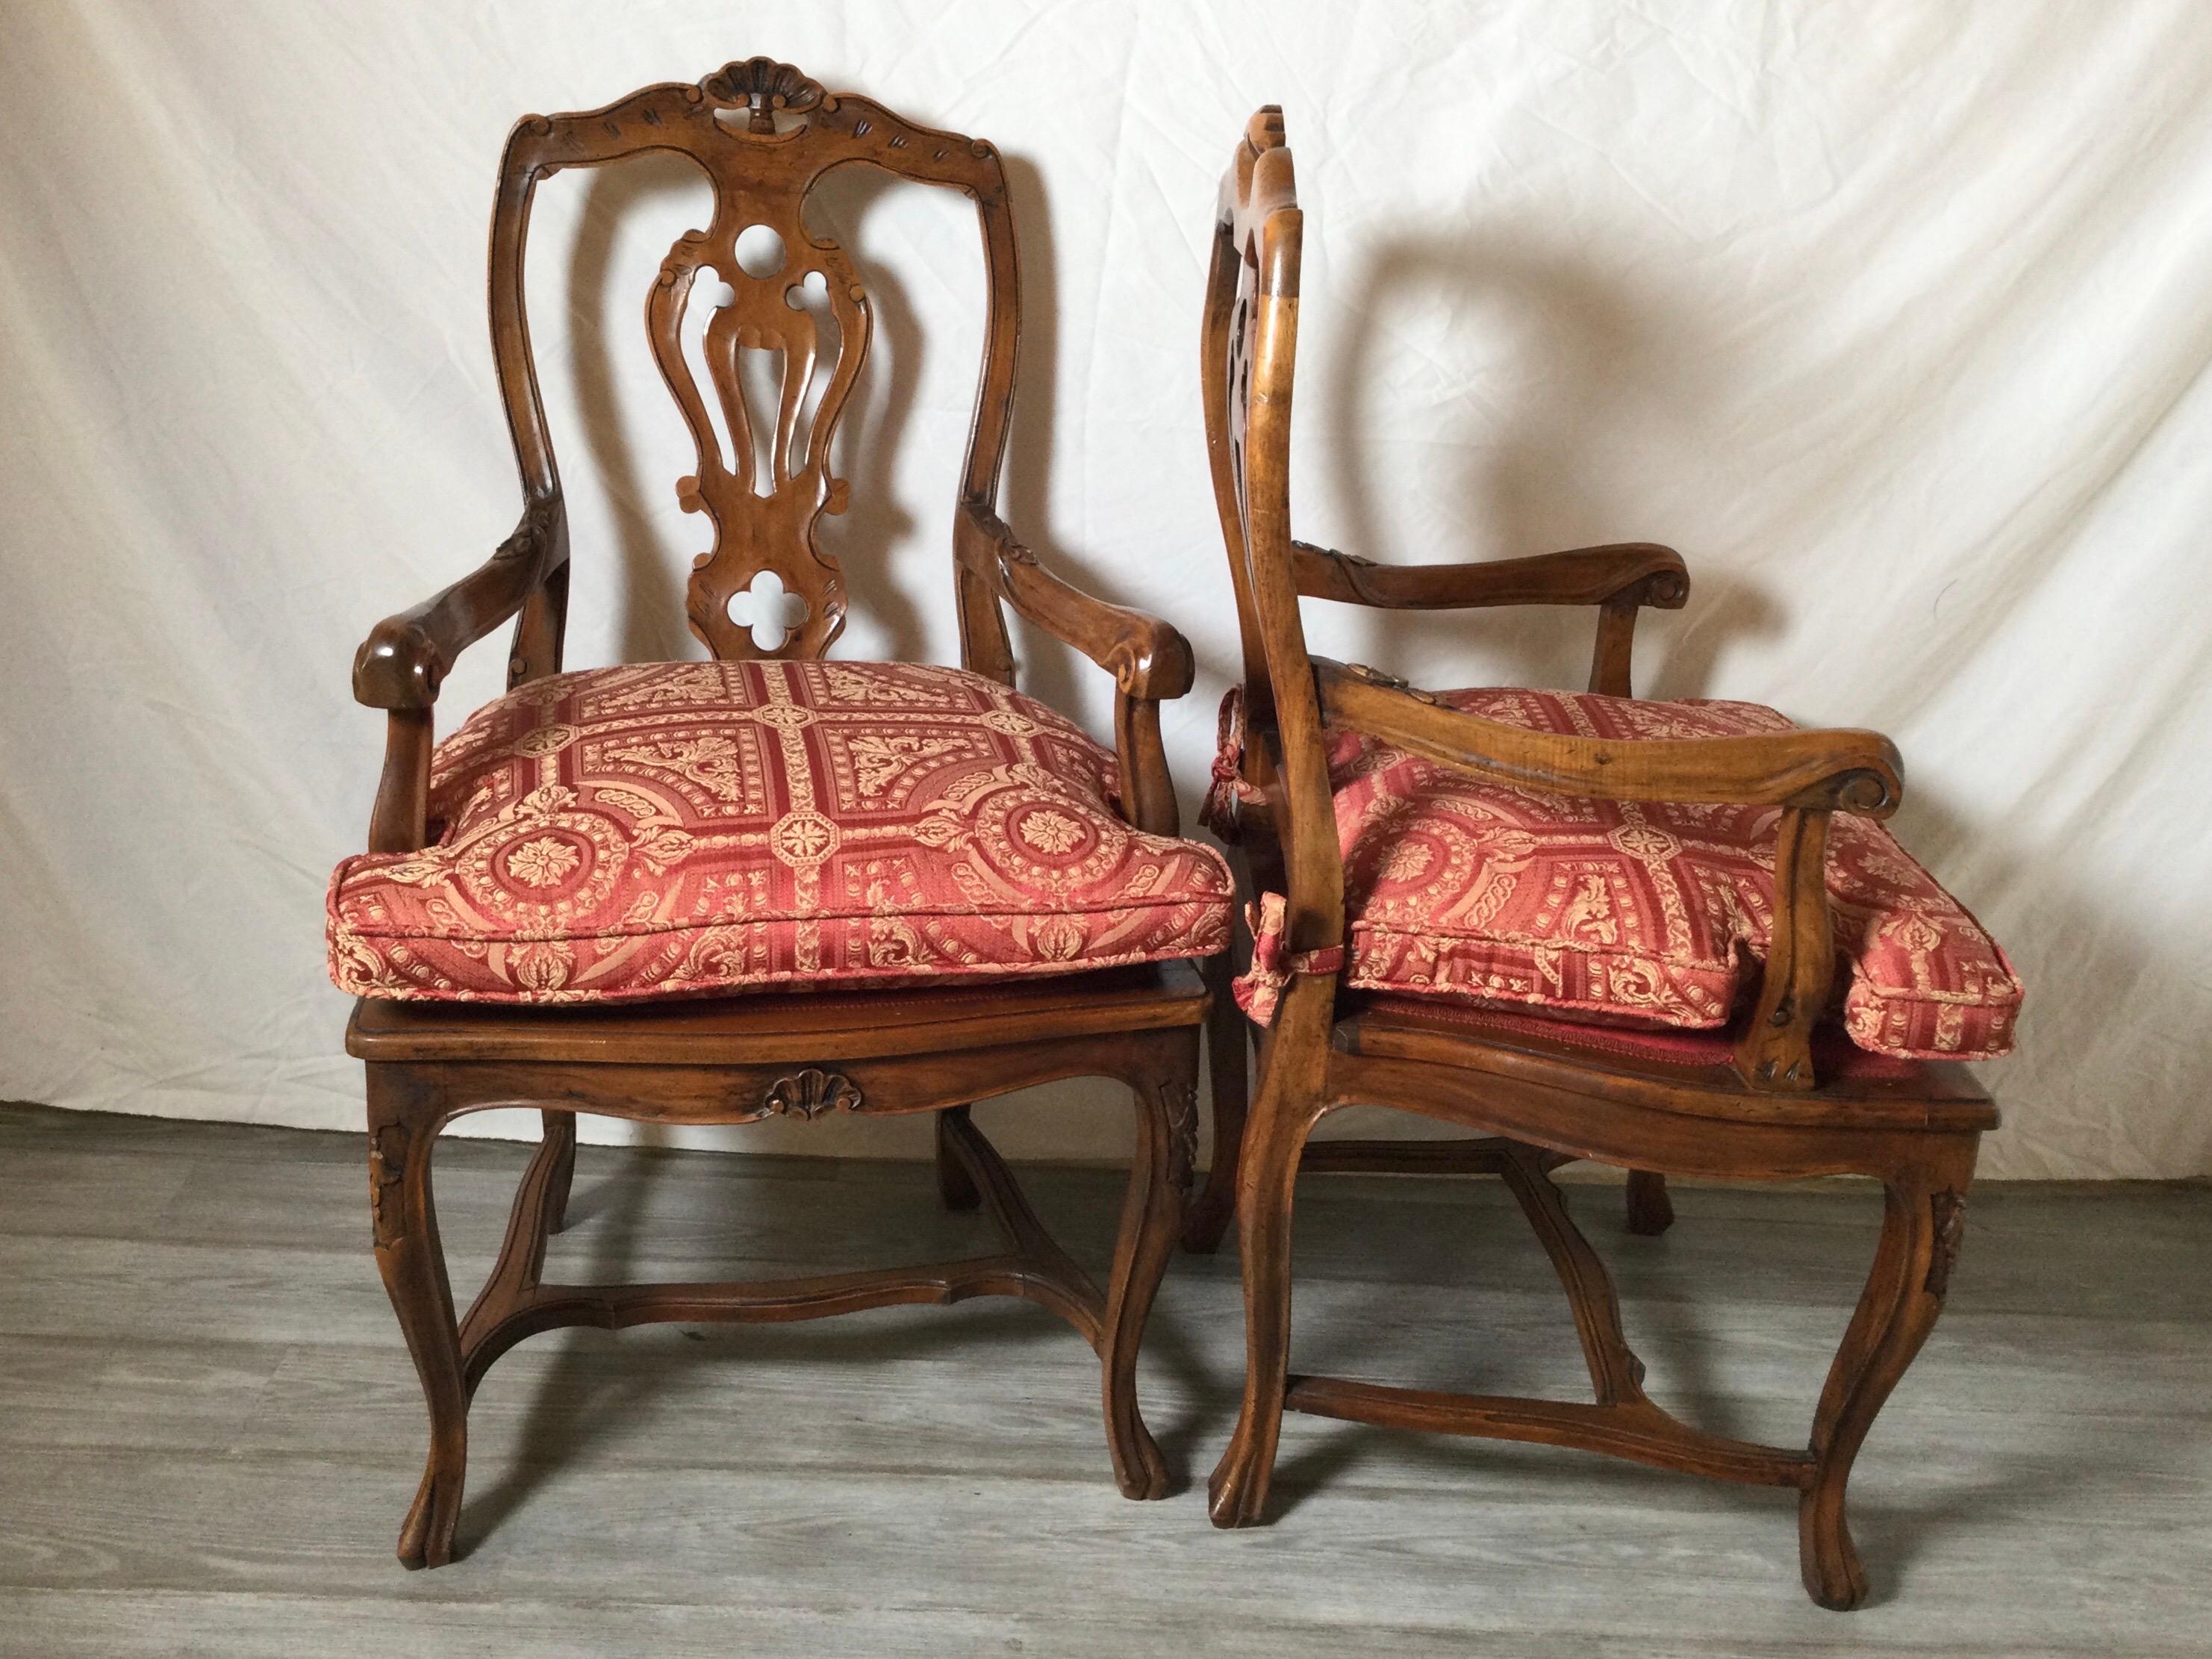 Early 20th Century Pair of Hand Carved Walnut Italian Provincial Arm Chairs, Circa 1900